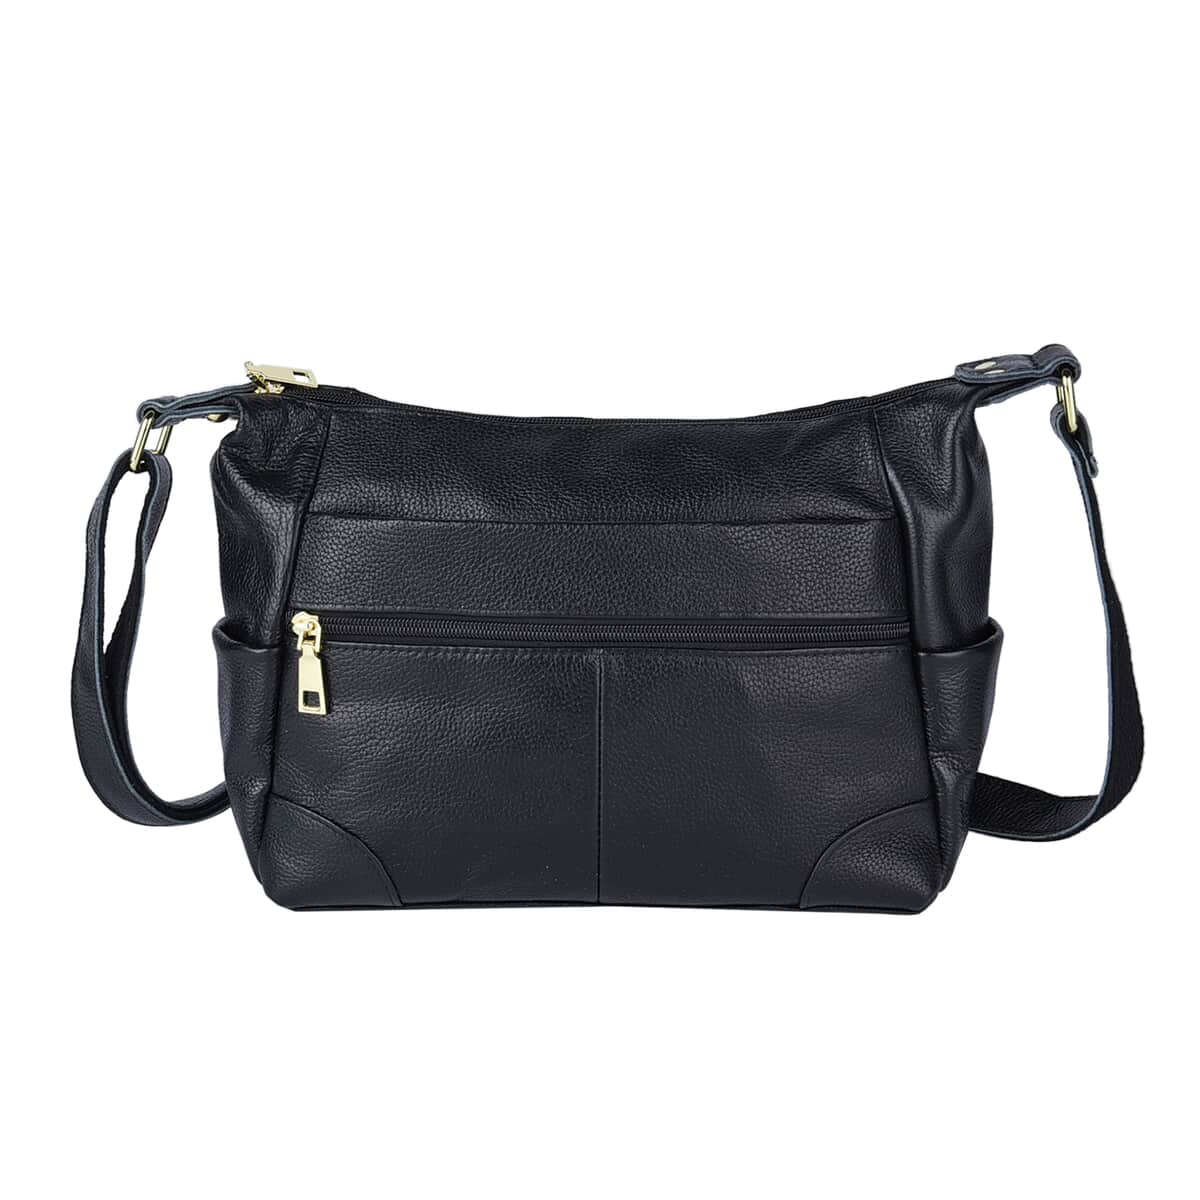 PASSAGE Black Genuine Leather Crossbody Bag (11.41"x3.94"x8.24") with Multi Pockets & 46 Inches Adjustable Shoulder Strap image number 0